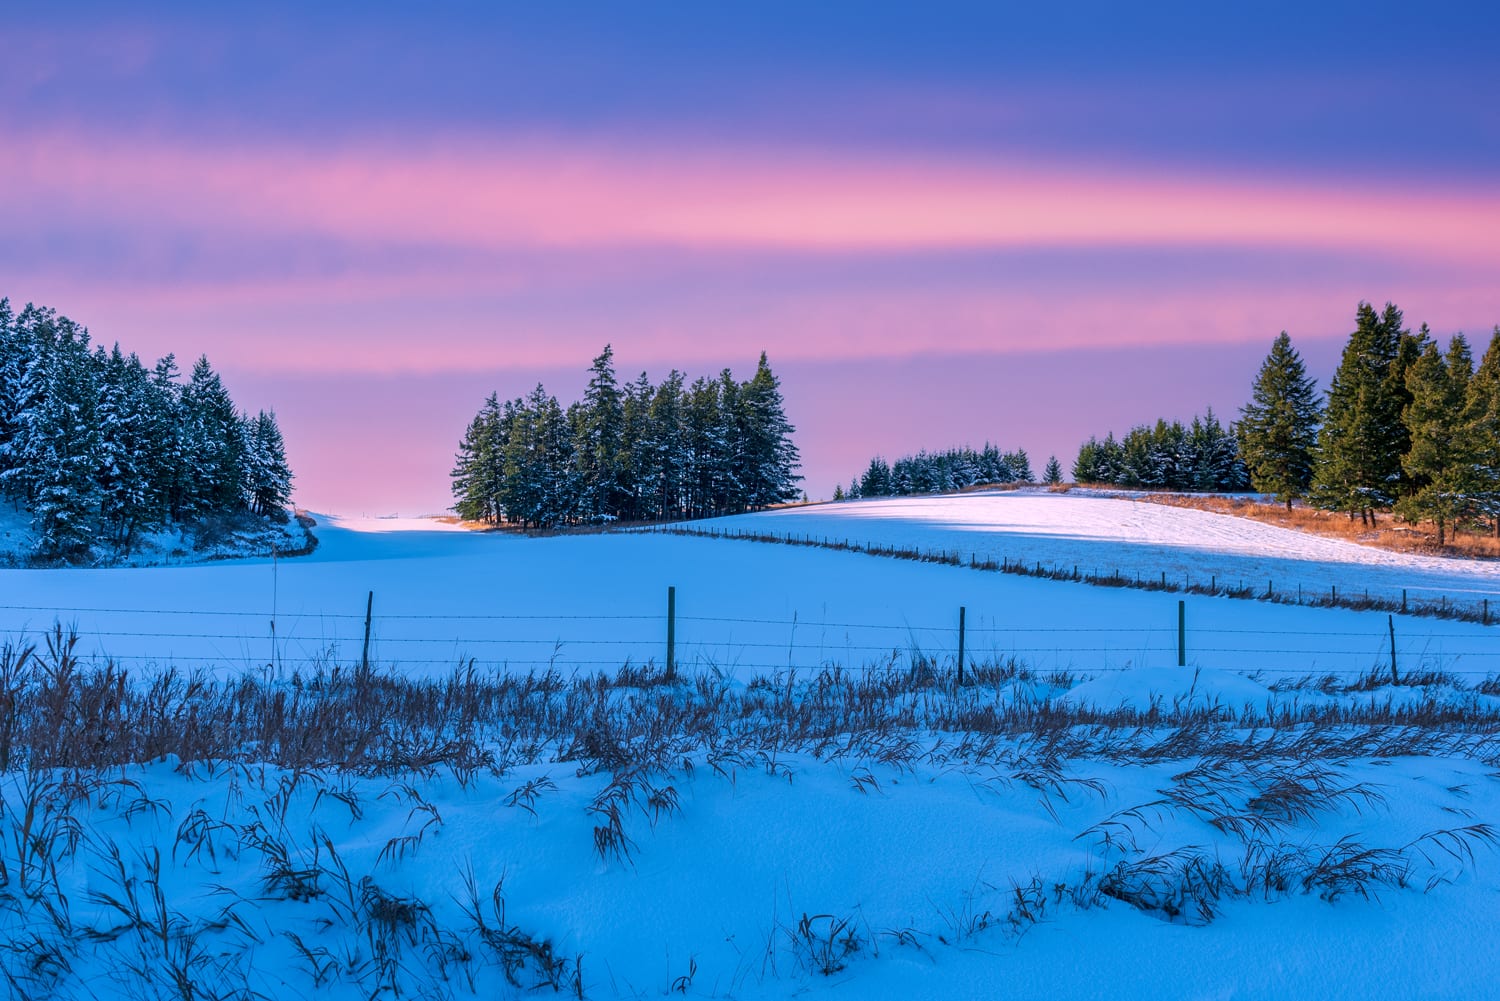 Kamloops rural life snowy plains with grass and trees with pink and blue sky